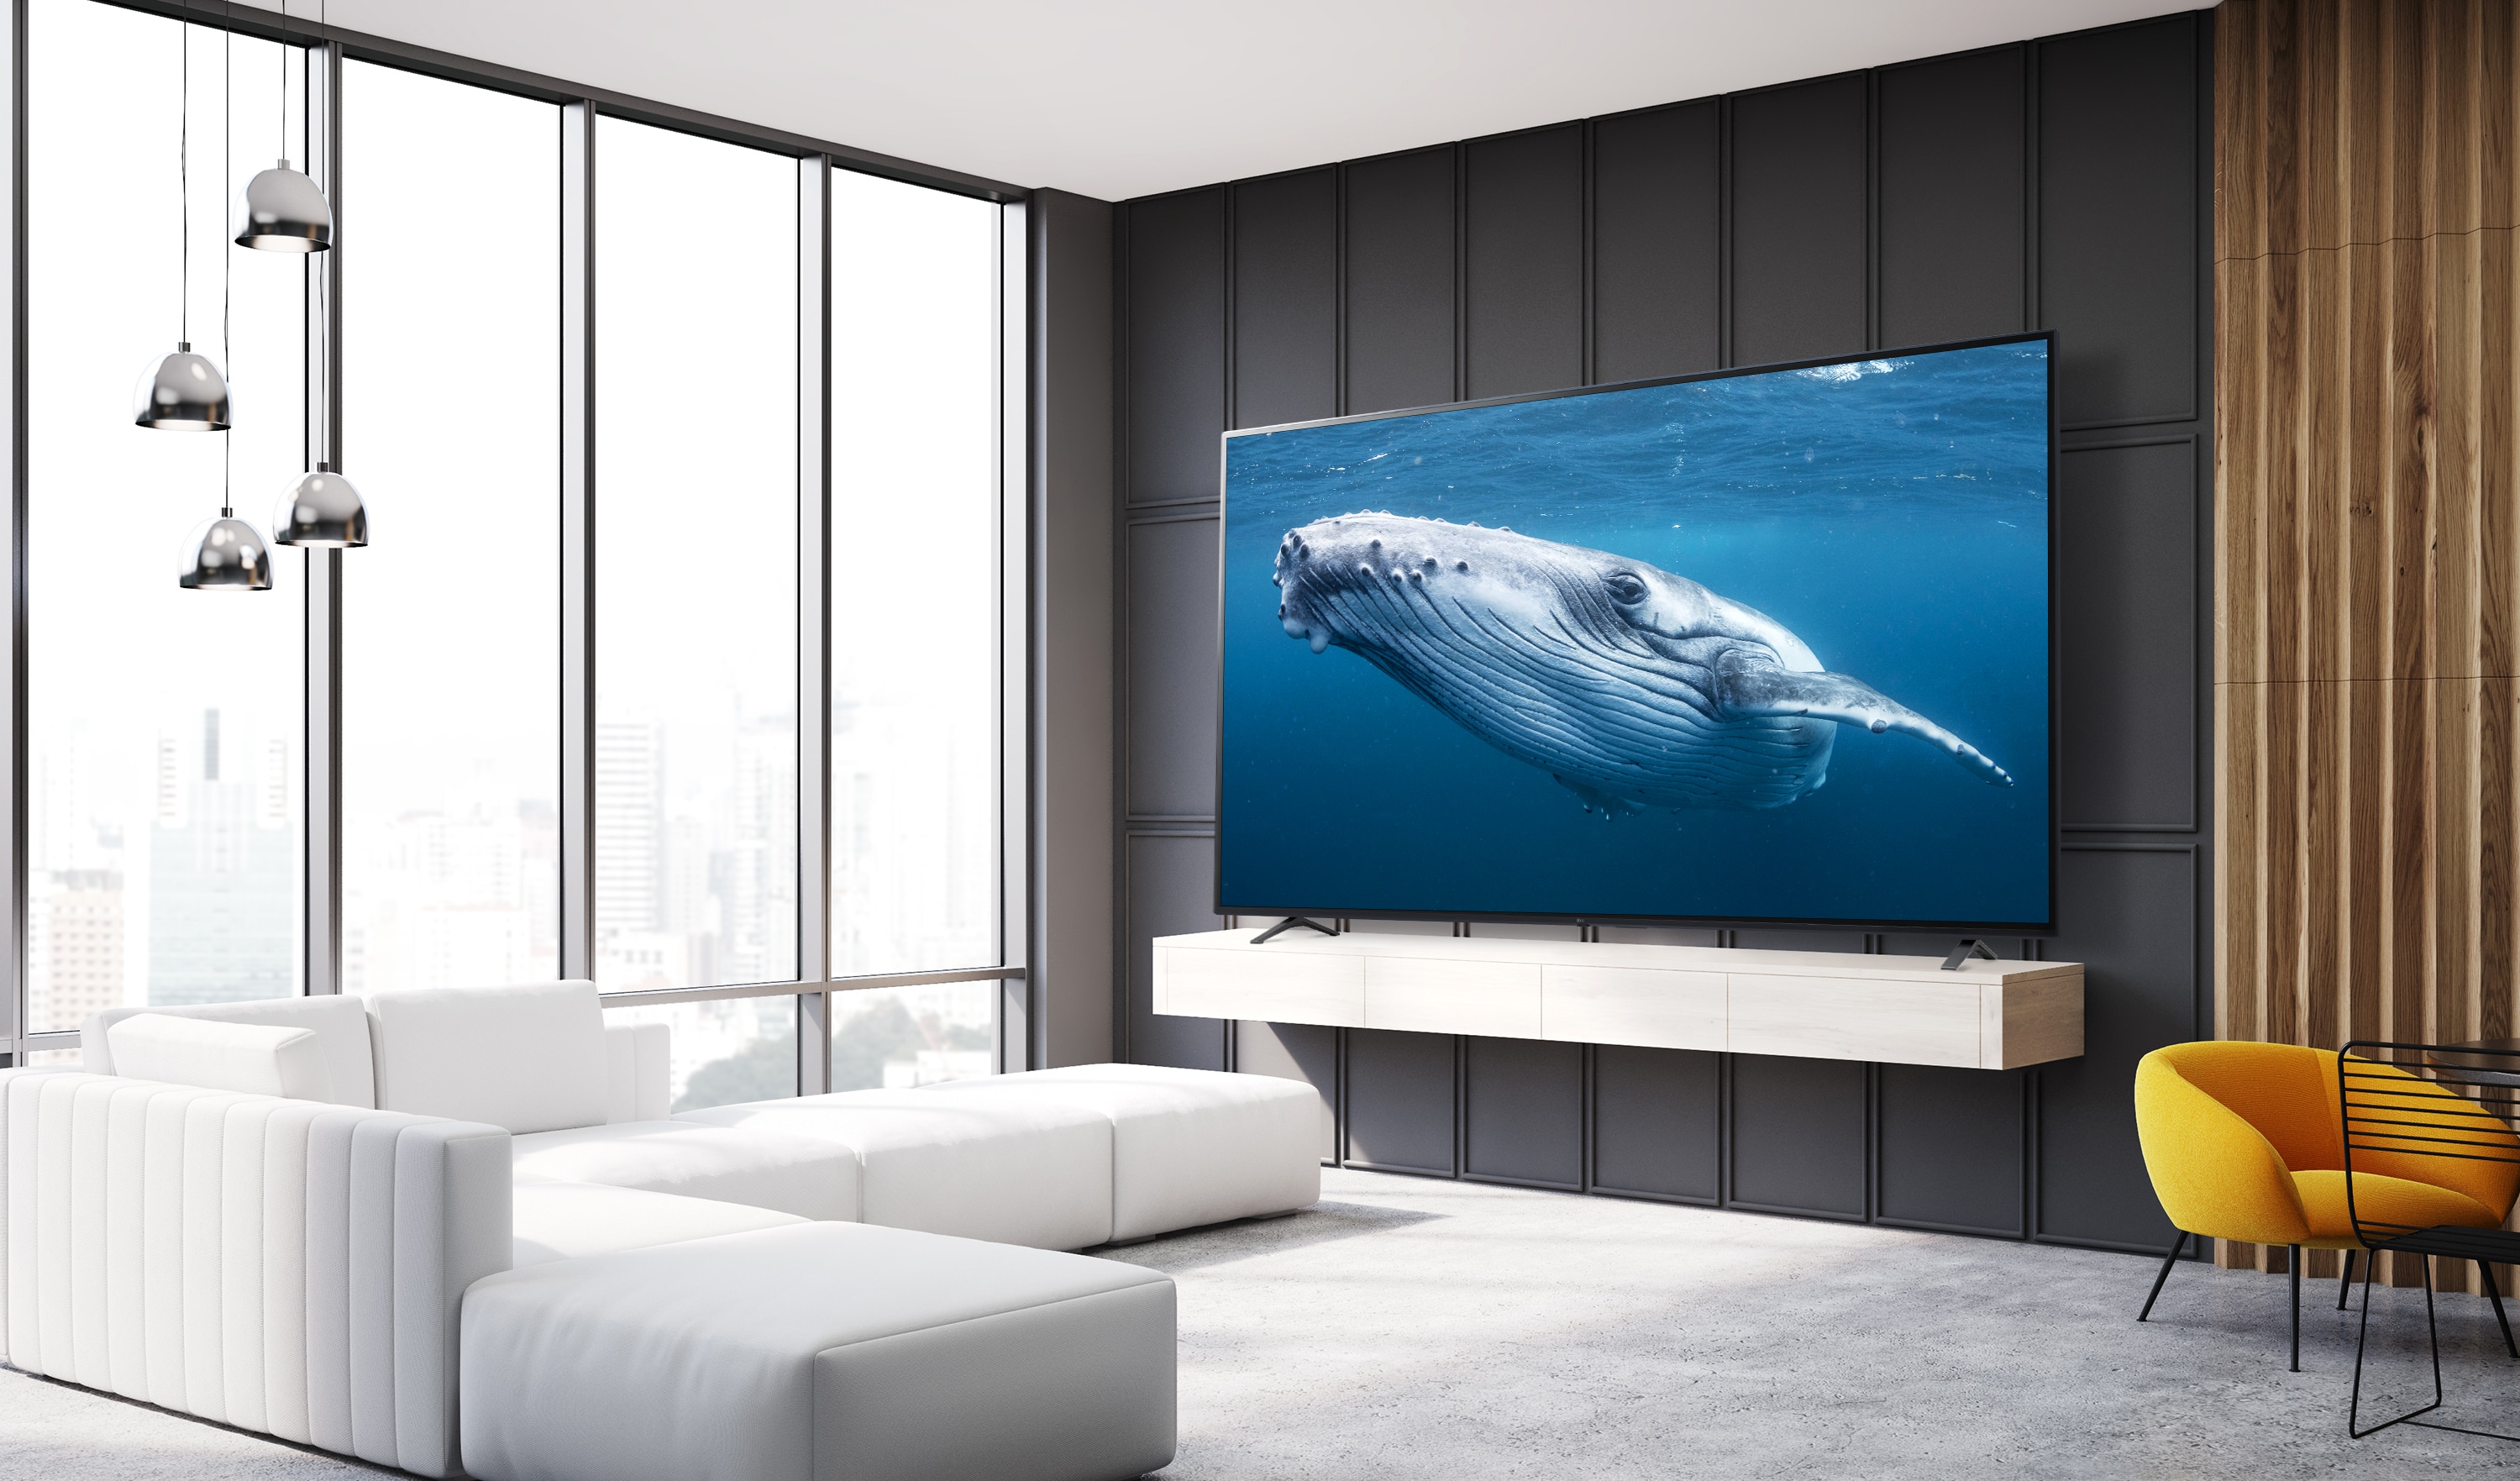 In a living room, there is a large screen TV displaying an image of a big whale in the sea.